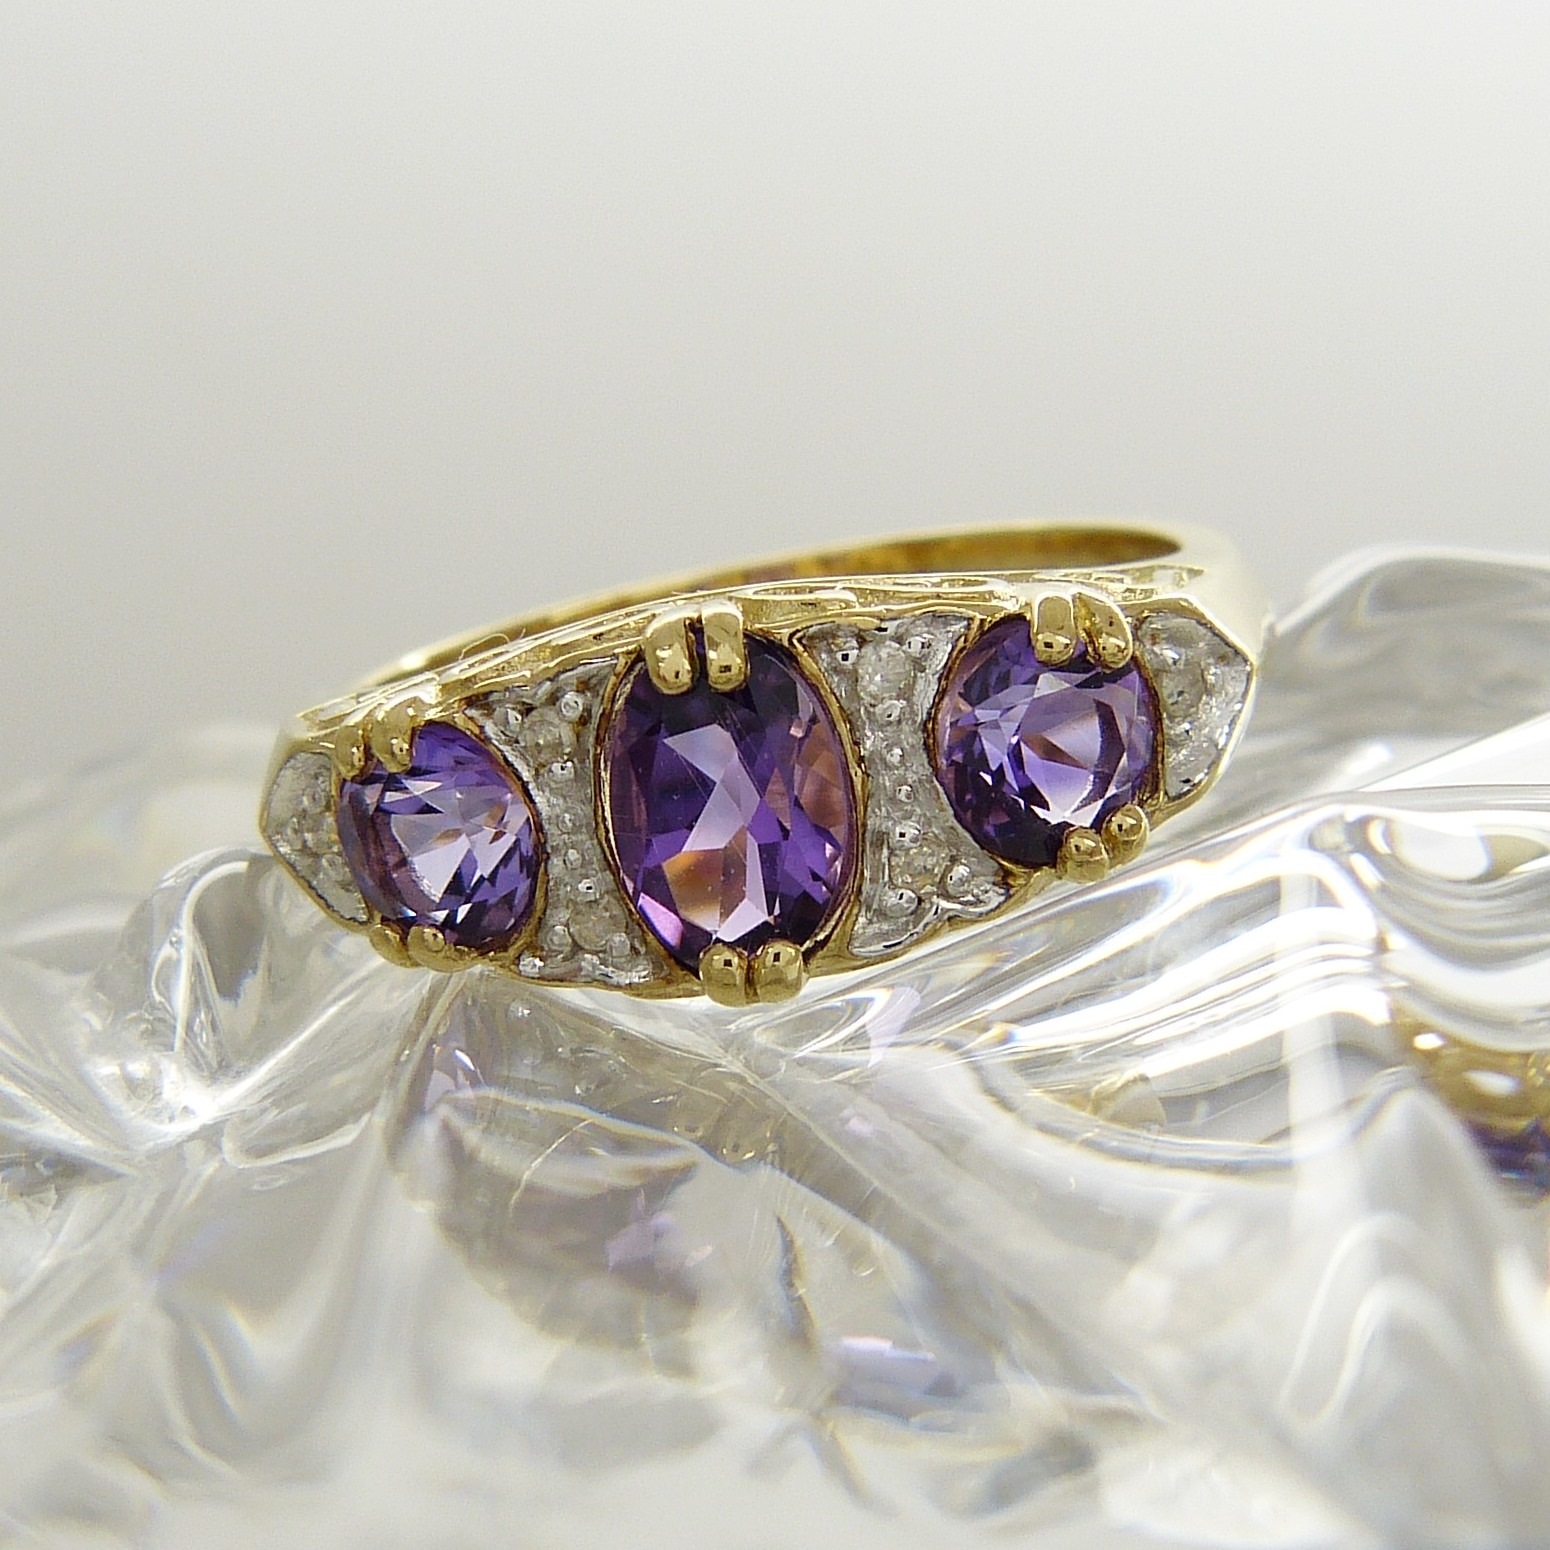 A Victorian-style dress ring set with amethysts and diamonds in 9ct yellow gold - Image 3 of 8